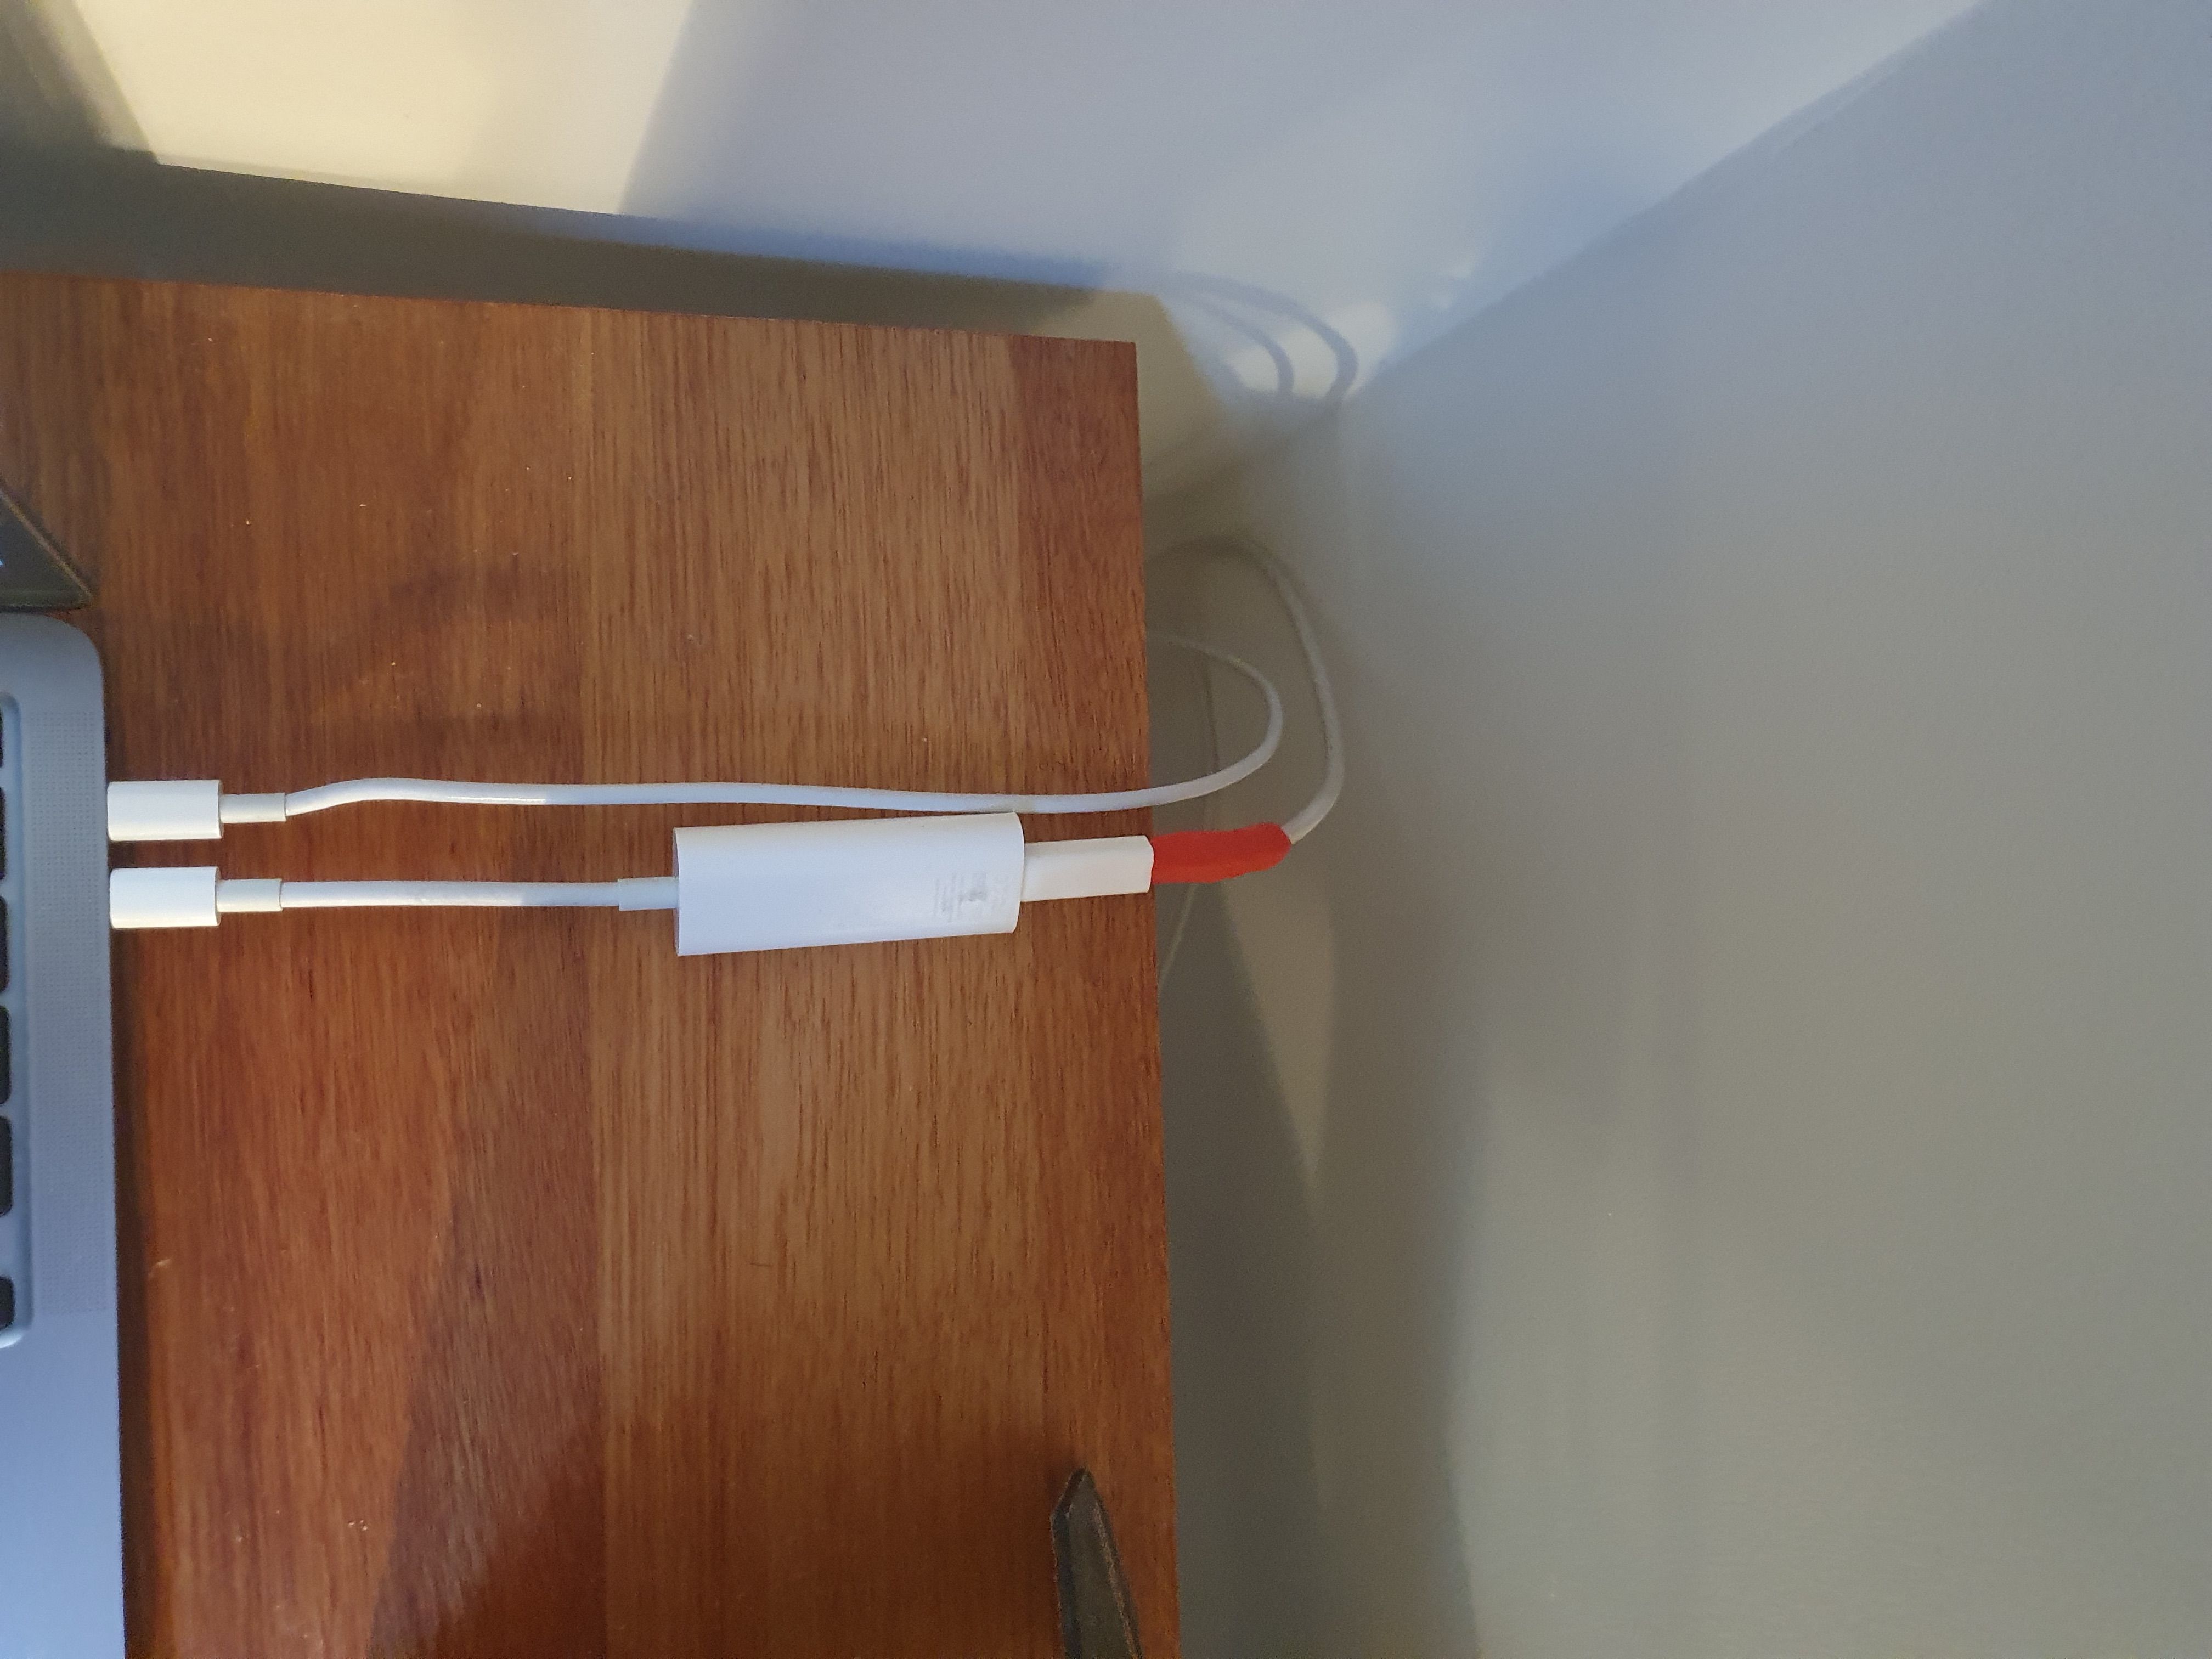 How To Fix A Charging Cable with Sugru Moldable Glue, Review/How-To